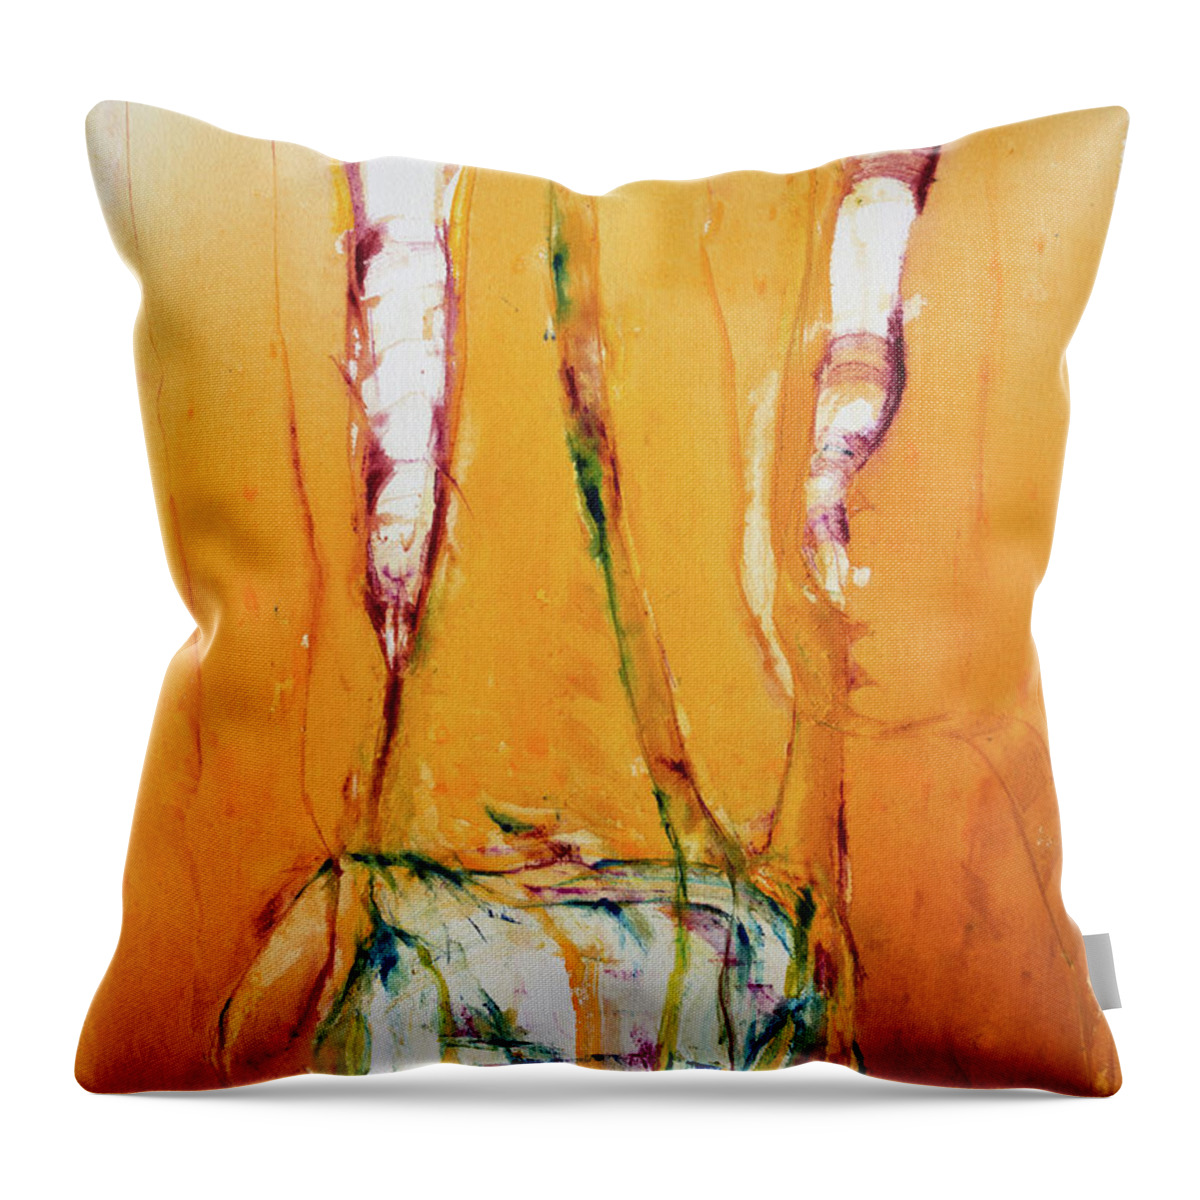  Throw Pillow featuring the painting 'Holding Down' by Petra Rau